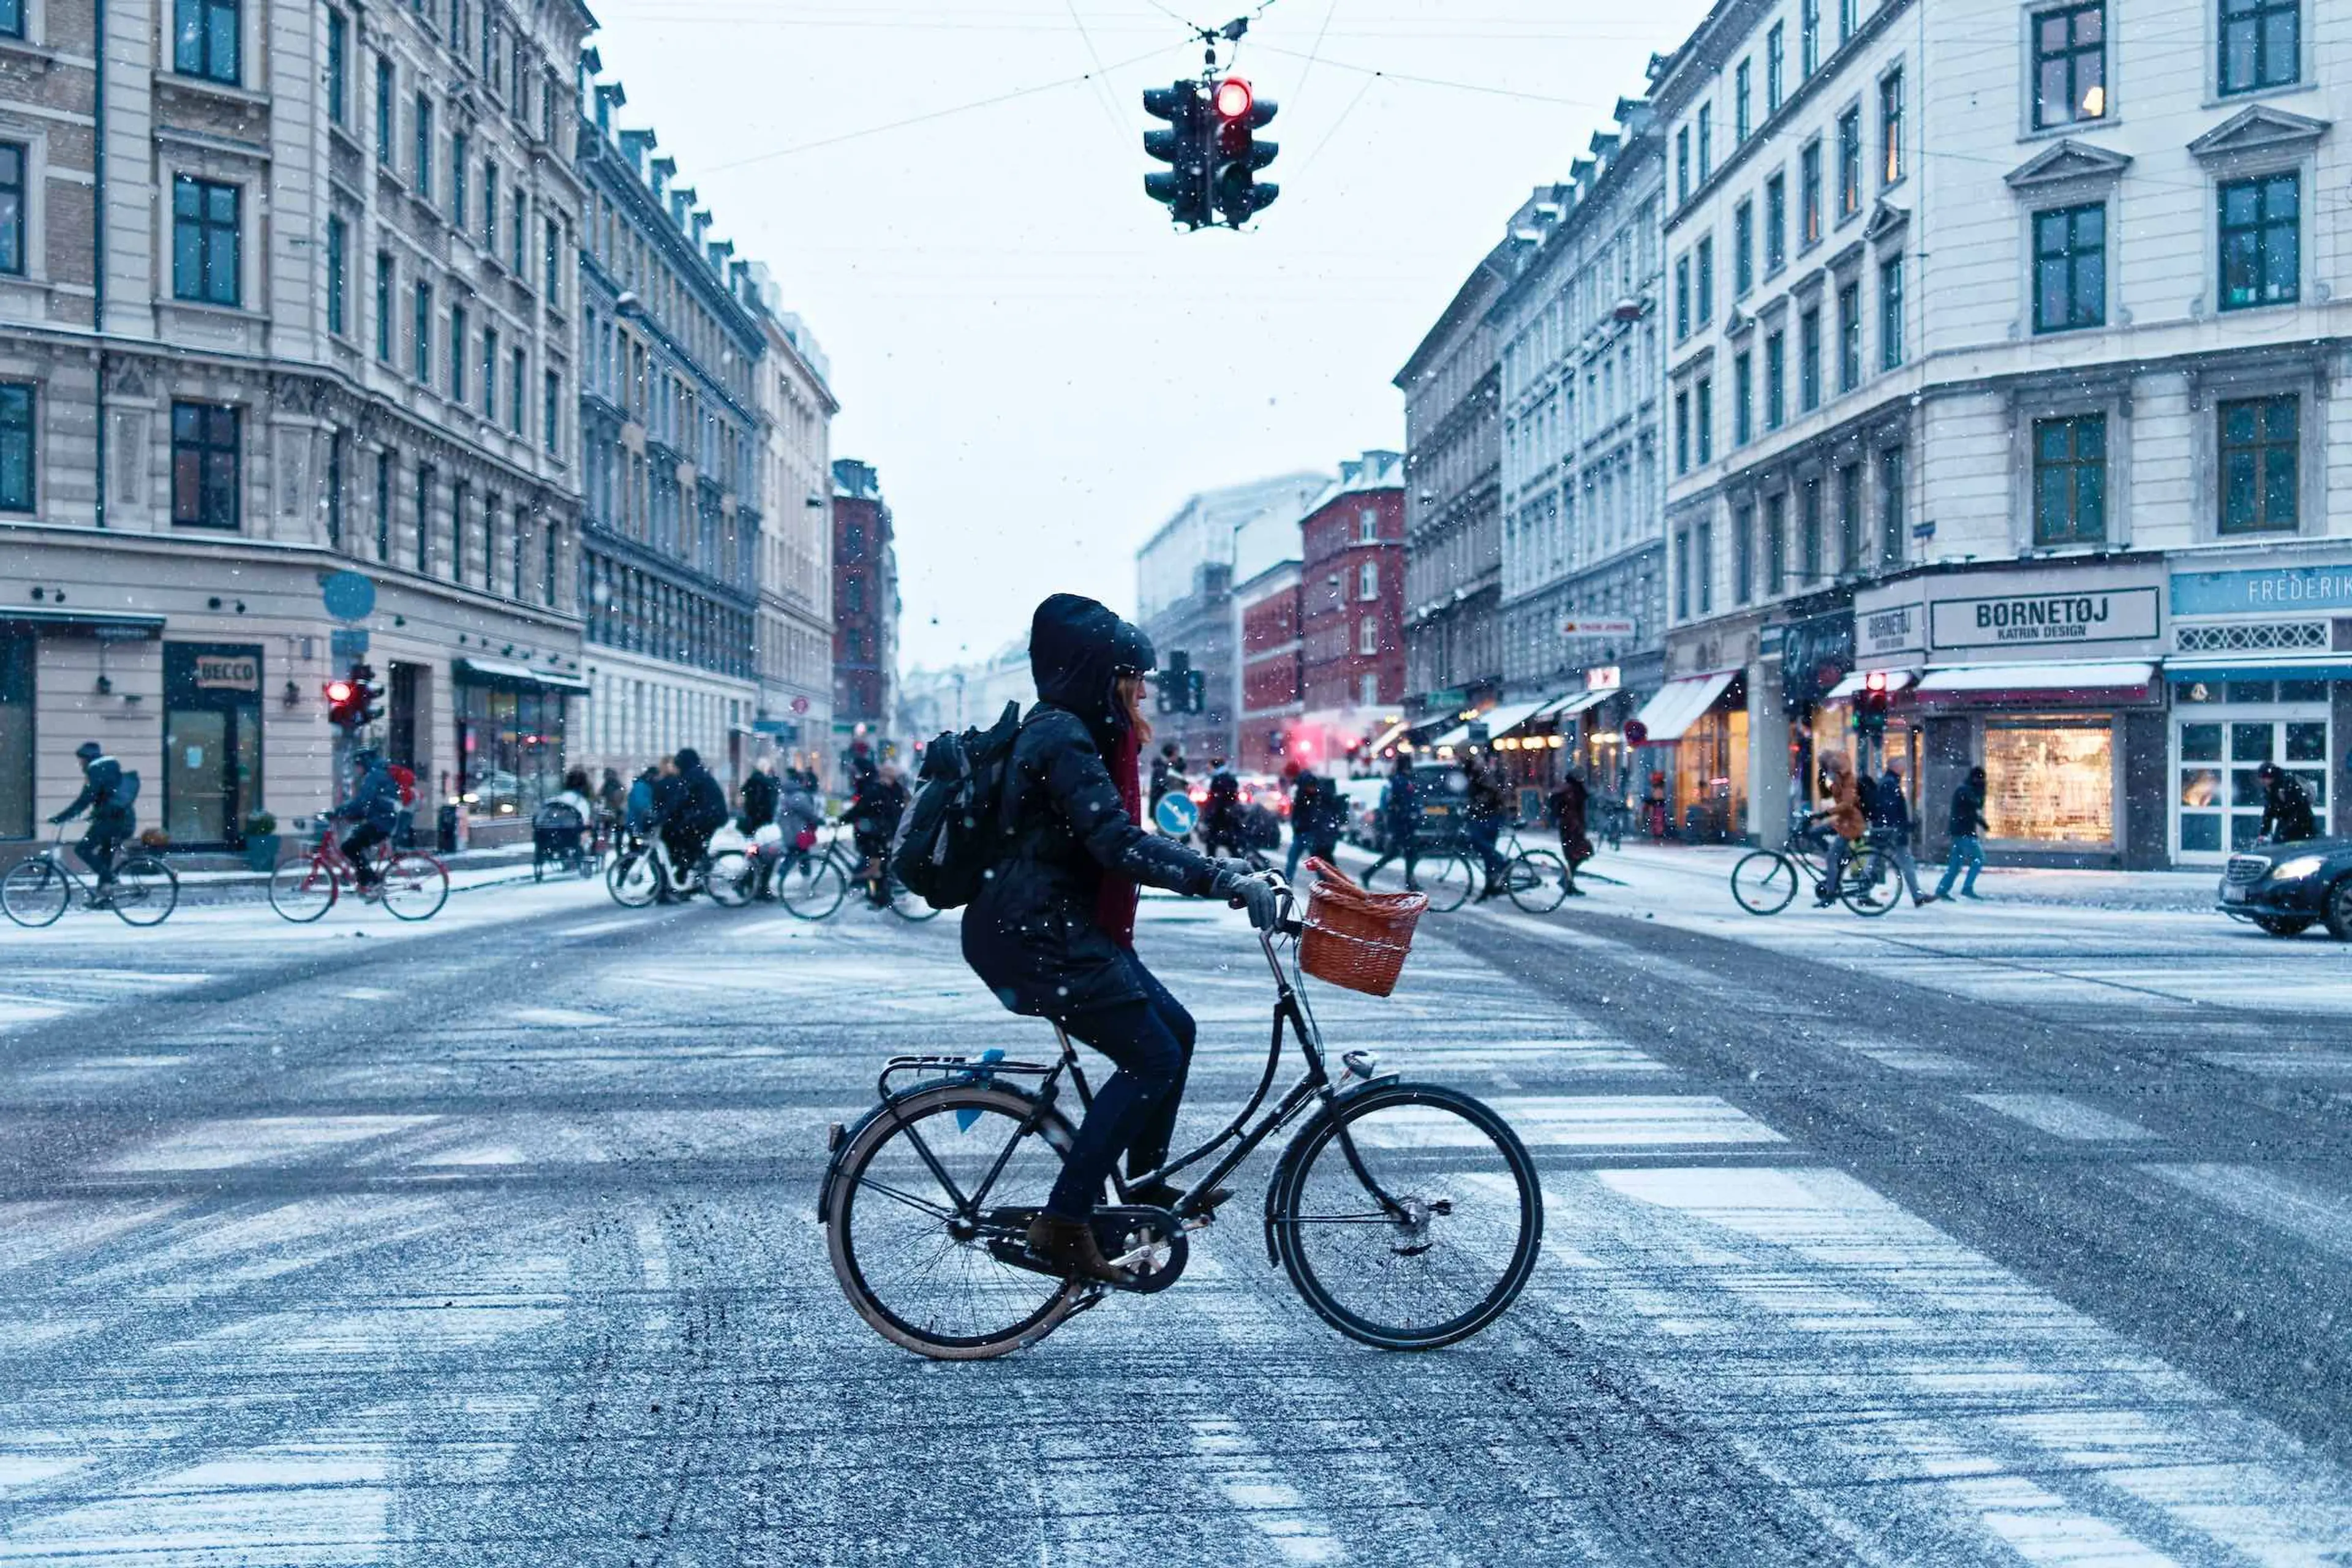 Copenhagen is known to be the World’s most bike-friendly city